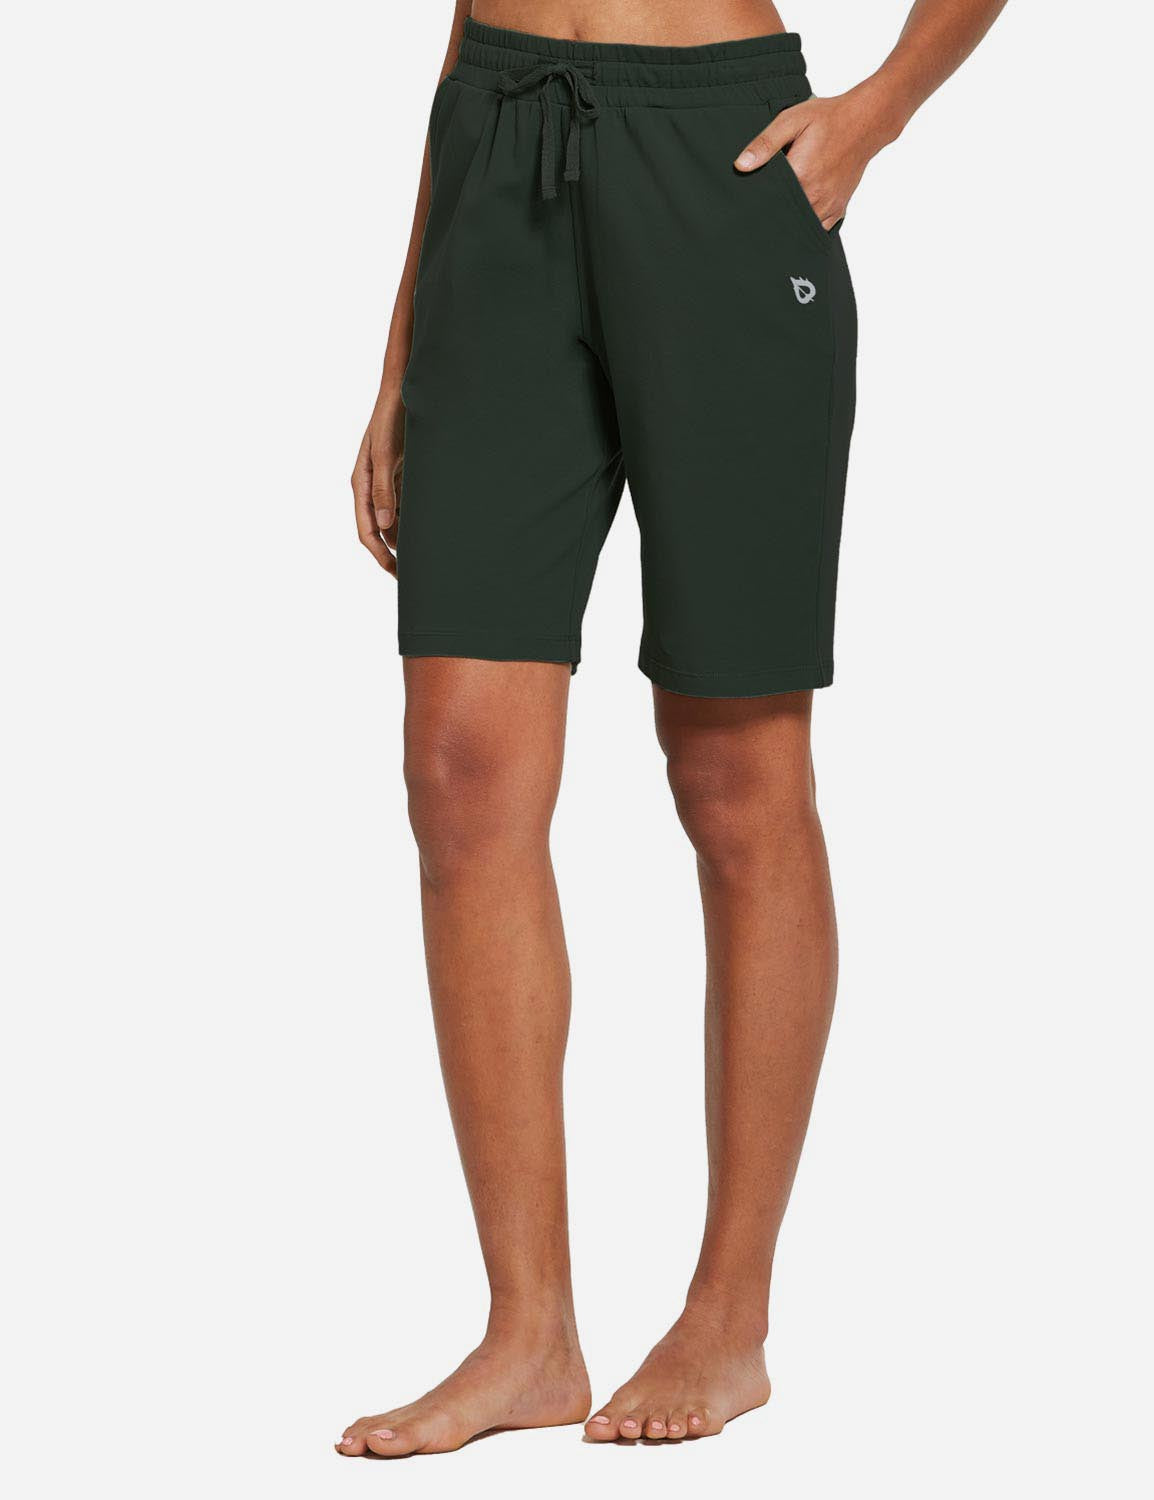 Baleaf Women's Cotton Pocketed Bermuda Jogger & Weekend Shorts abh104 Army Green Front